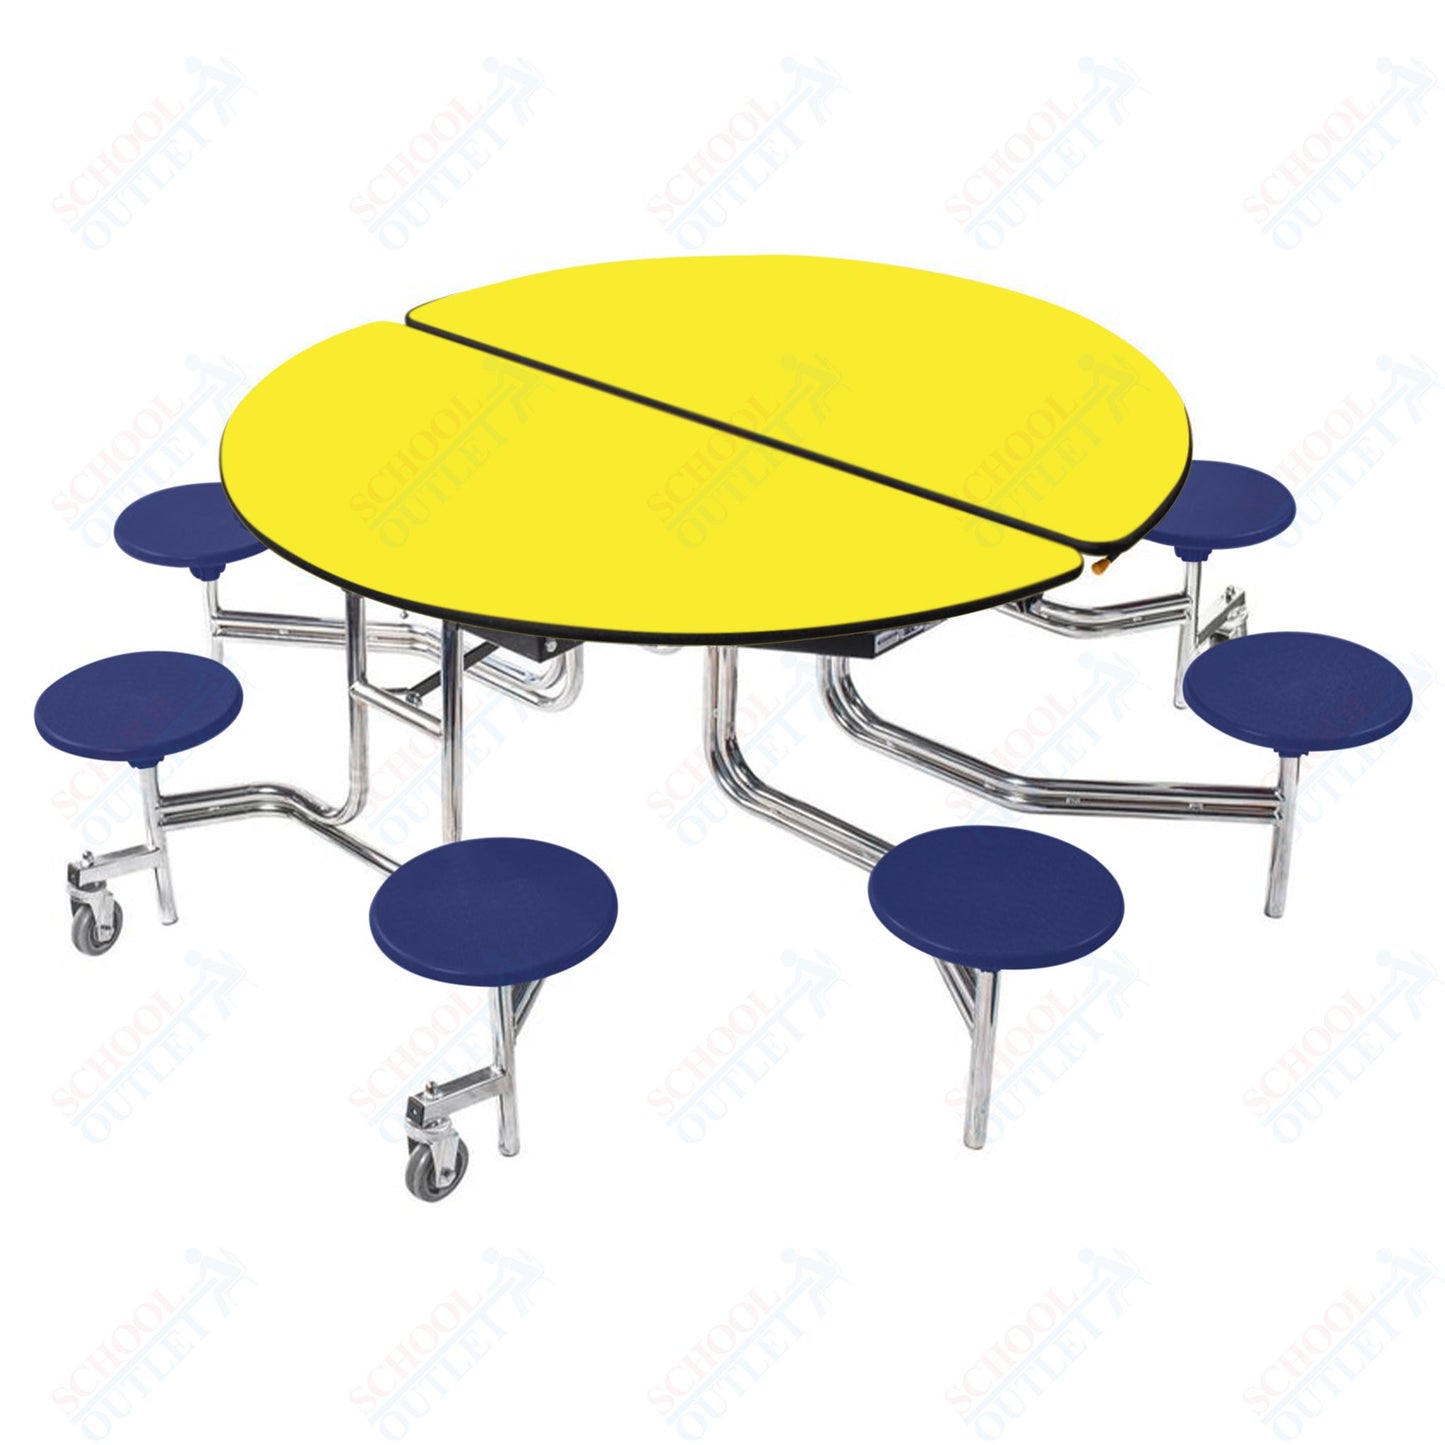 NPS 60" Round Mobile Cafeteria Table - 8 Stools - Particleboard Core - T-Molding Edge - Chrome Frame